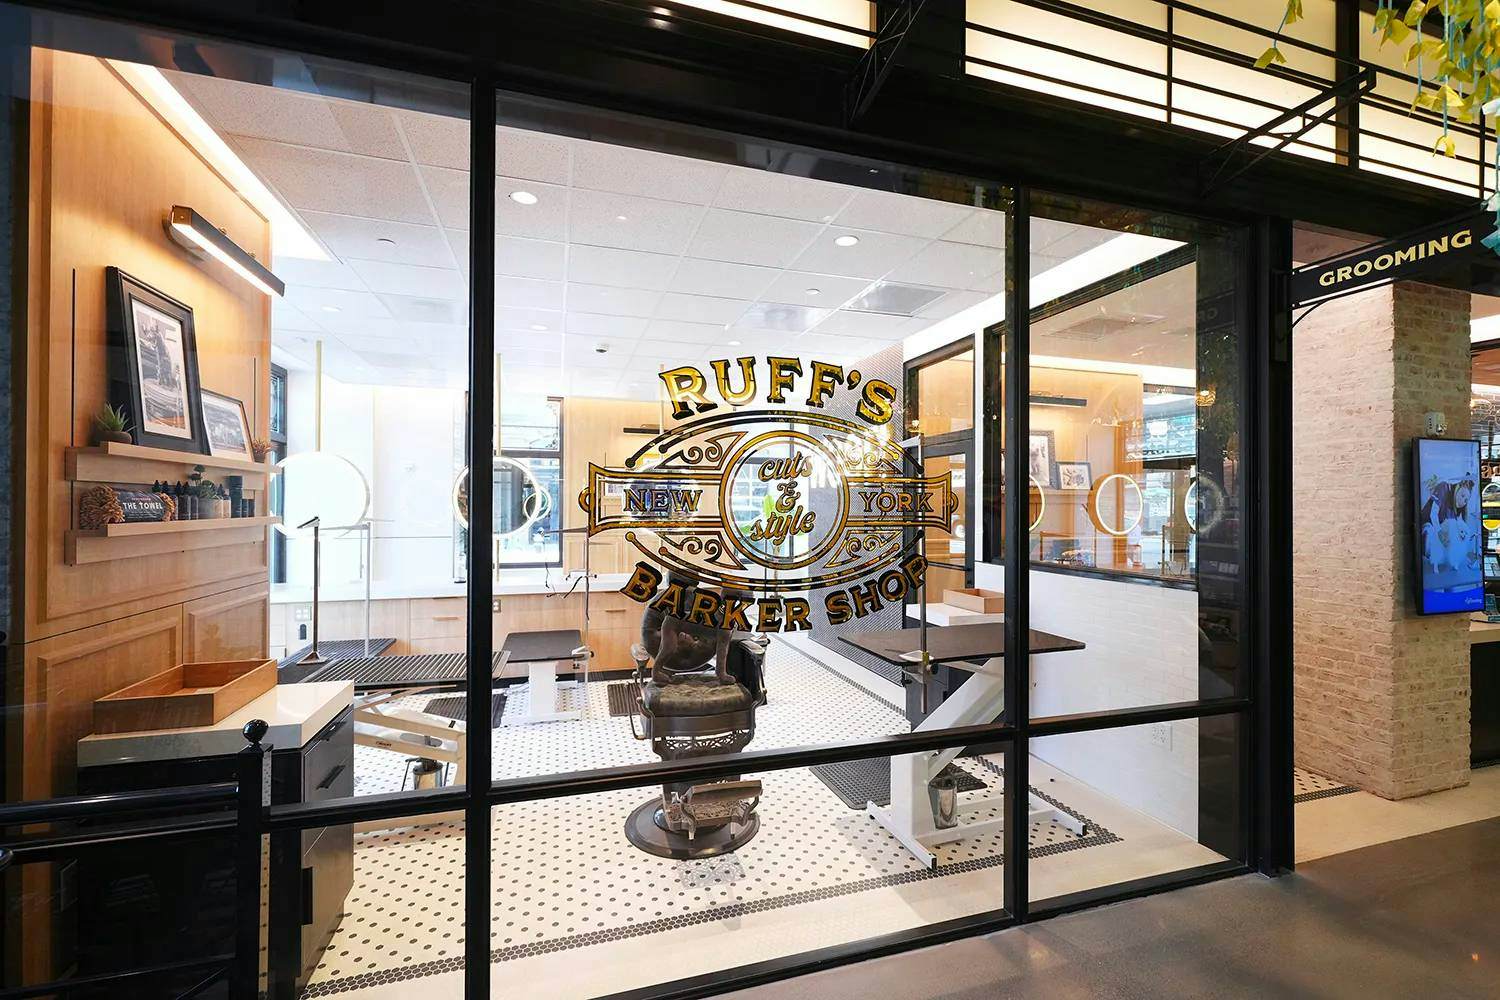 The dog grooming area inside Petco’s NYC flagship is called Riuff’s Barker Shop.